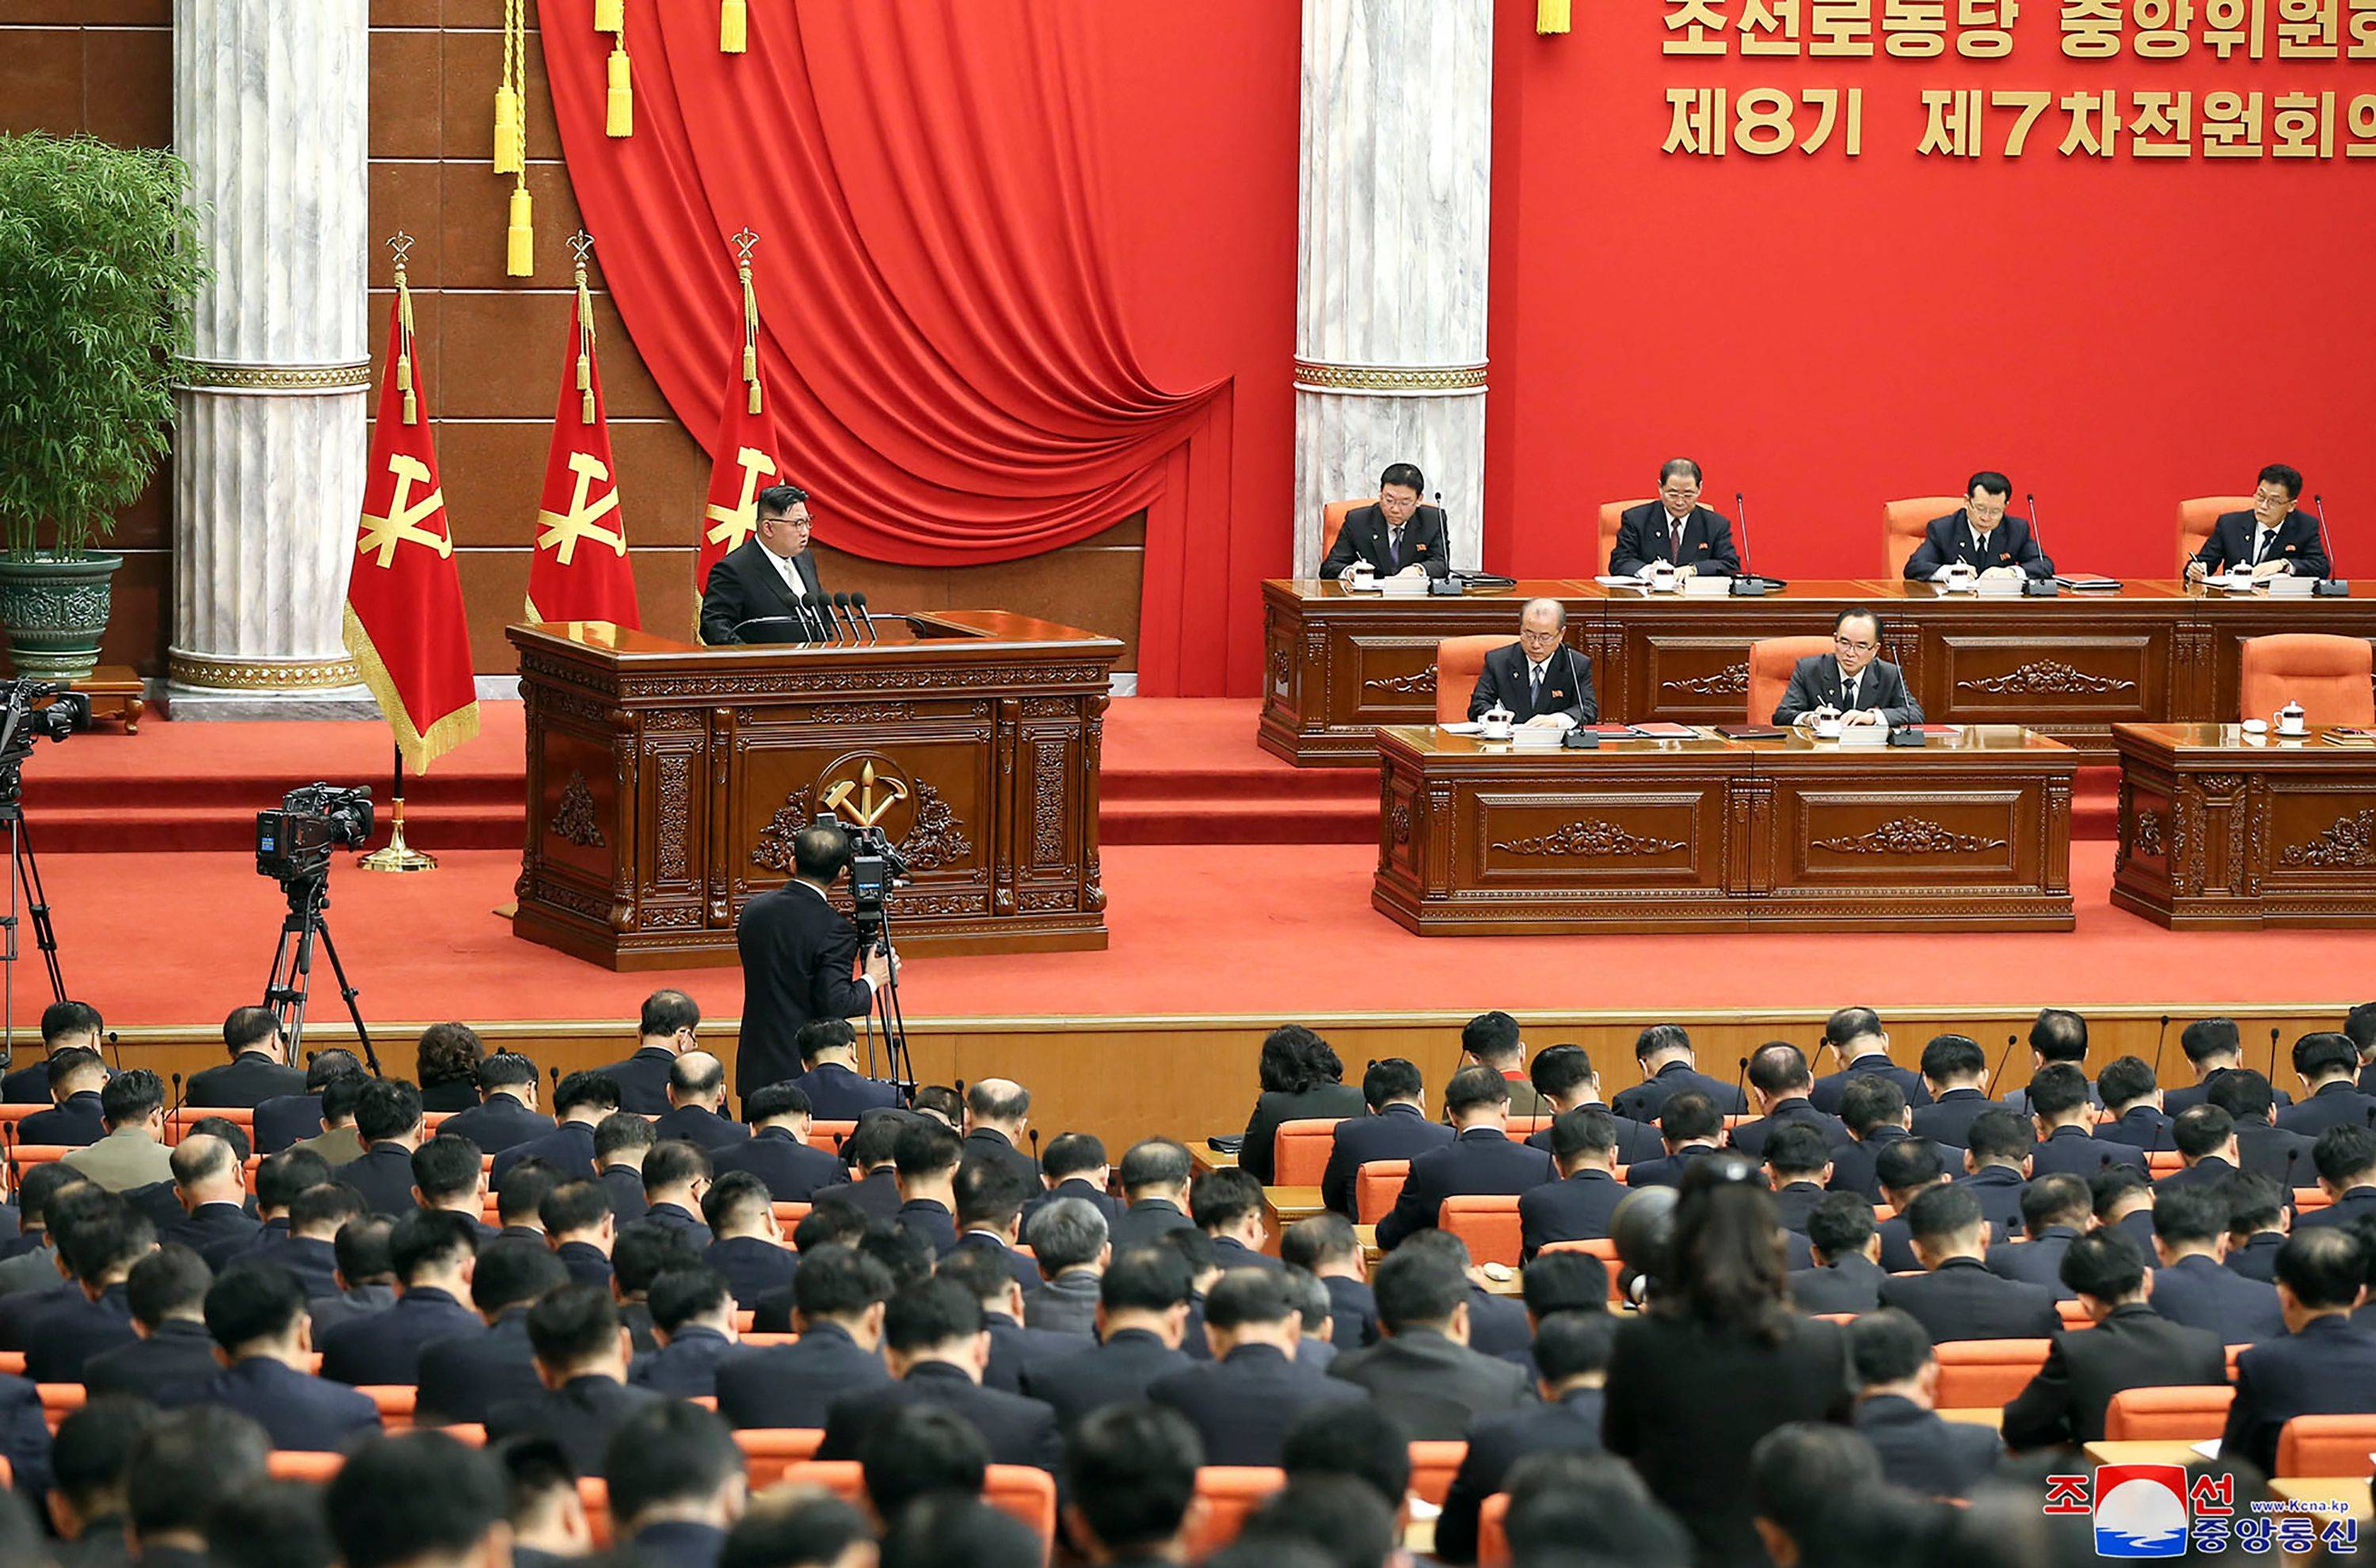 North Korean leader Kim Jong Un attends the 7th enlarged plenary meeting of the 8th Central Committee of the Workers' Party of Korea at the office building of the WPK Central Committee in Pyongyang. | KCNA / KNS / VIA AFP-JIJI